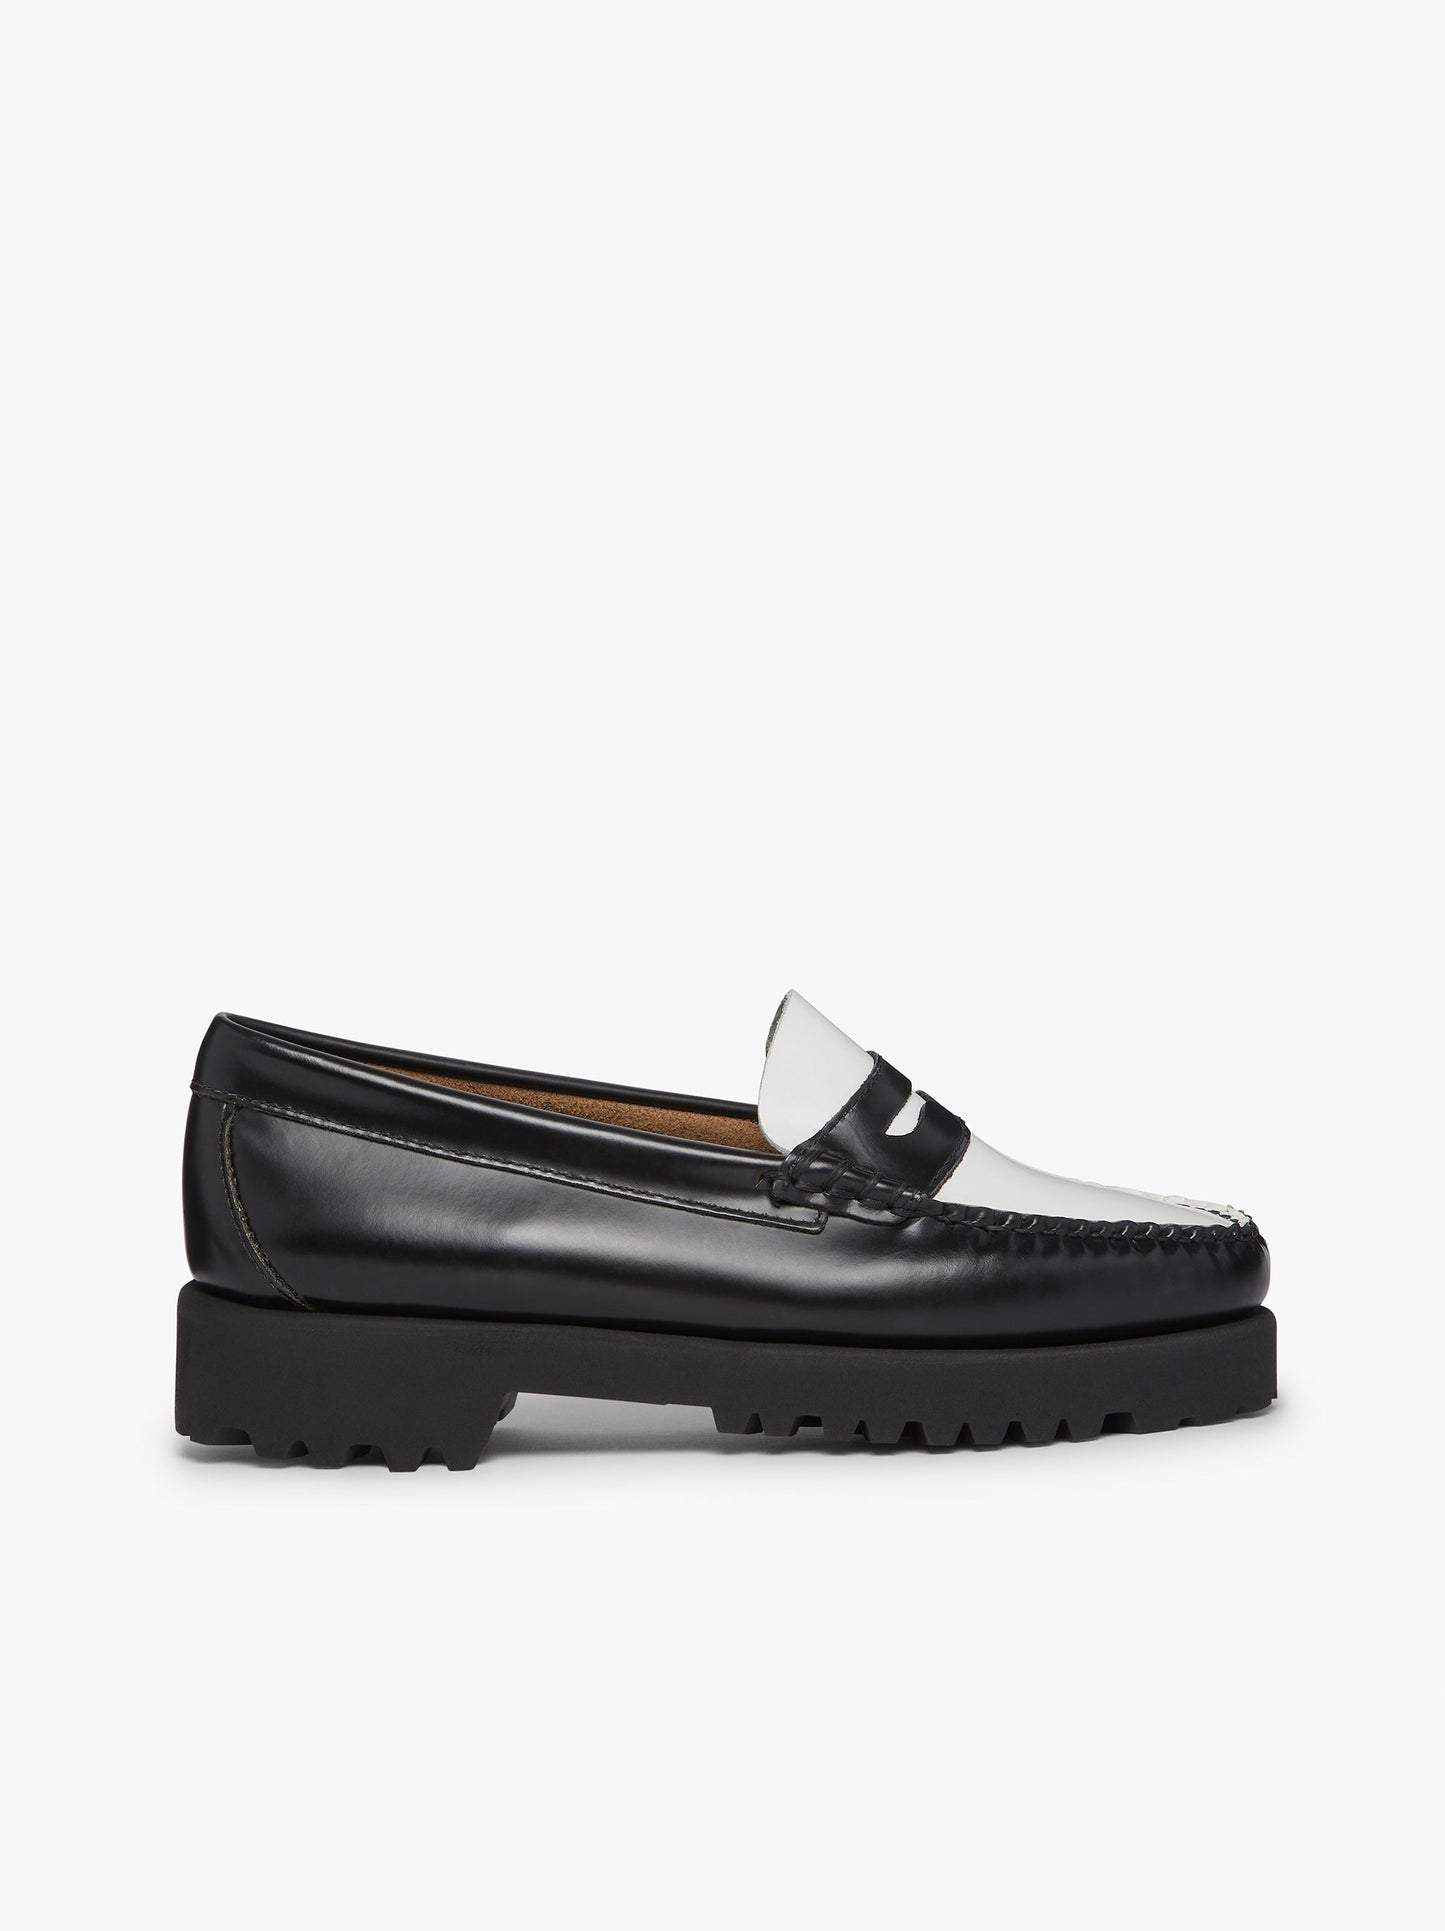 G.H. BASS- Weejuns Penny Loafers Lianna